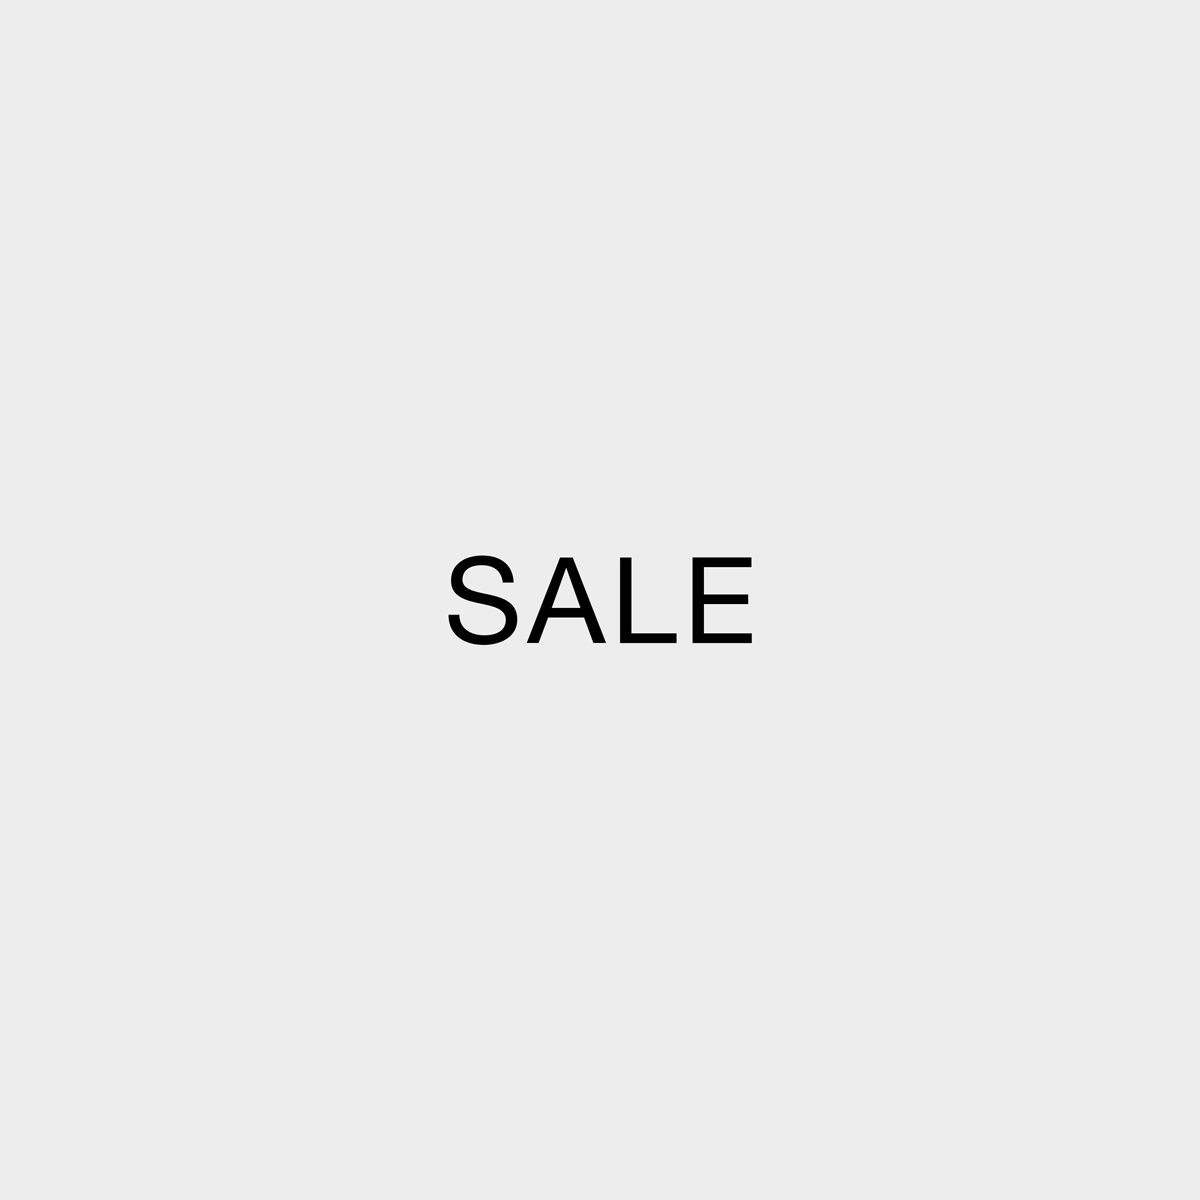 Sale - Up to 50% off